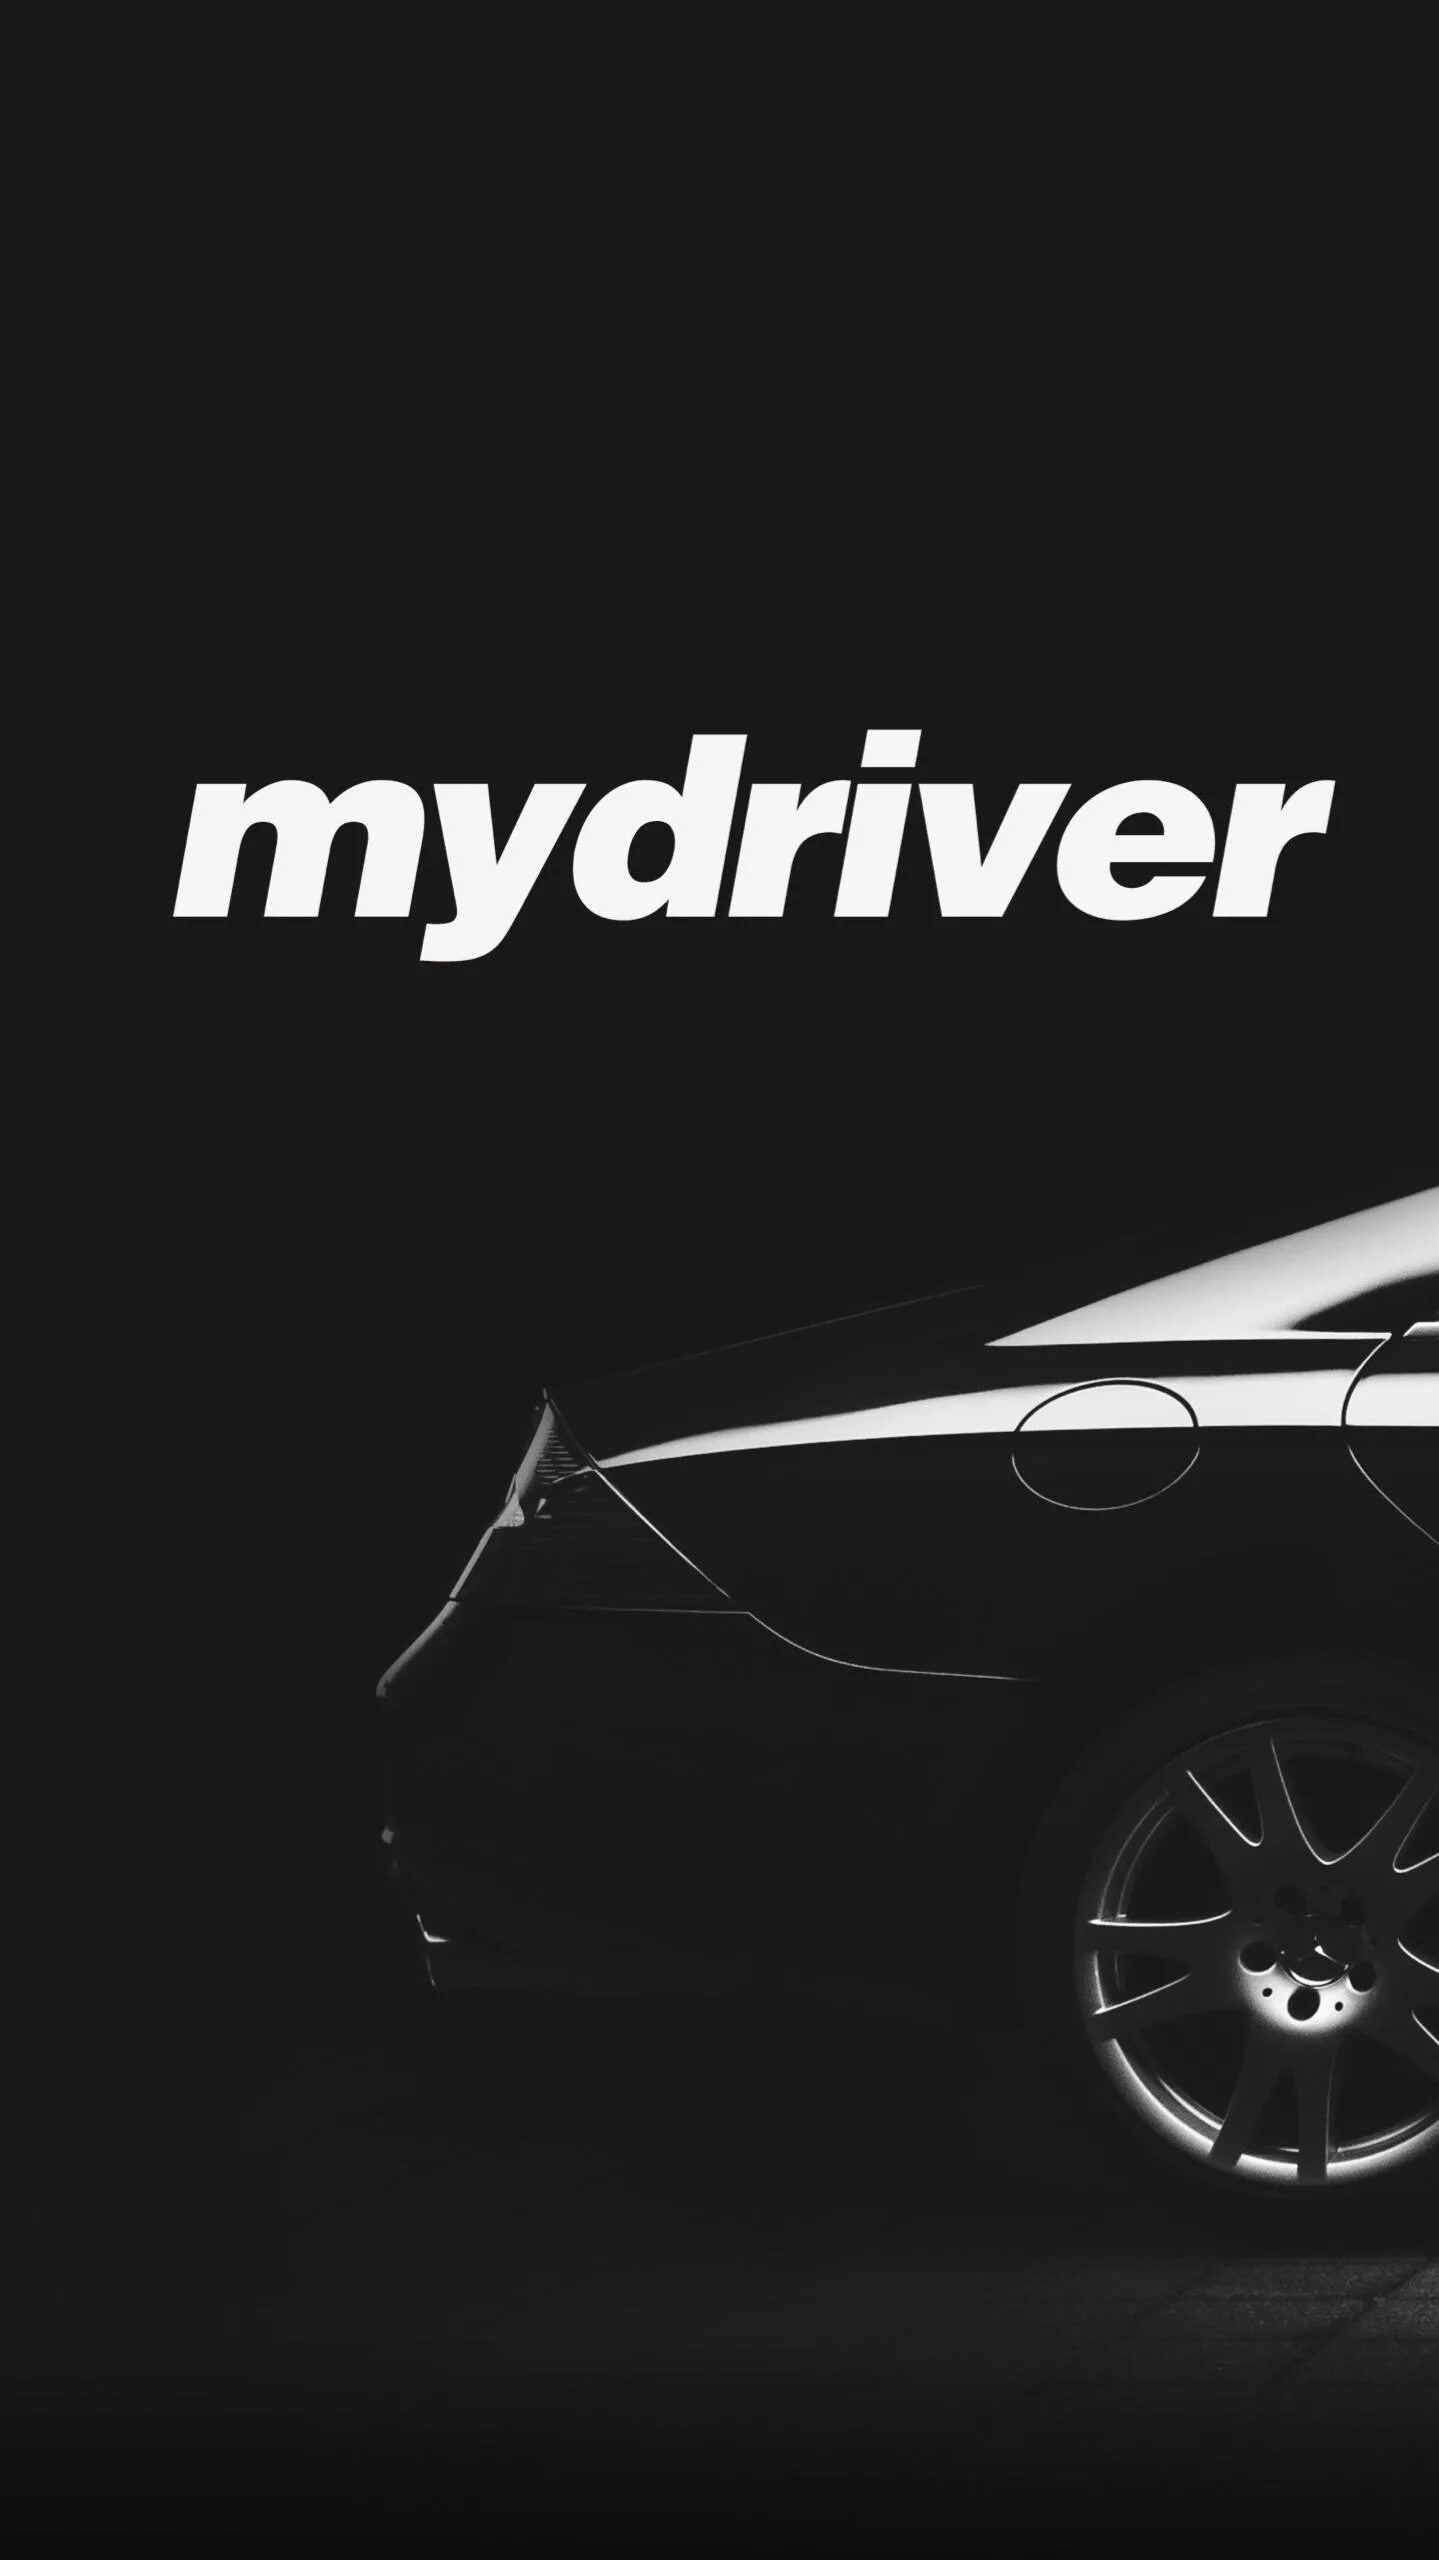 My Driver. MYDRIVERS. Own drive